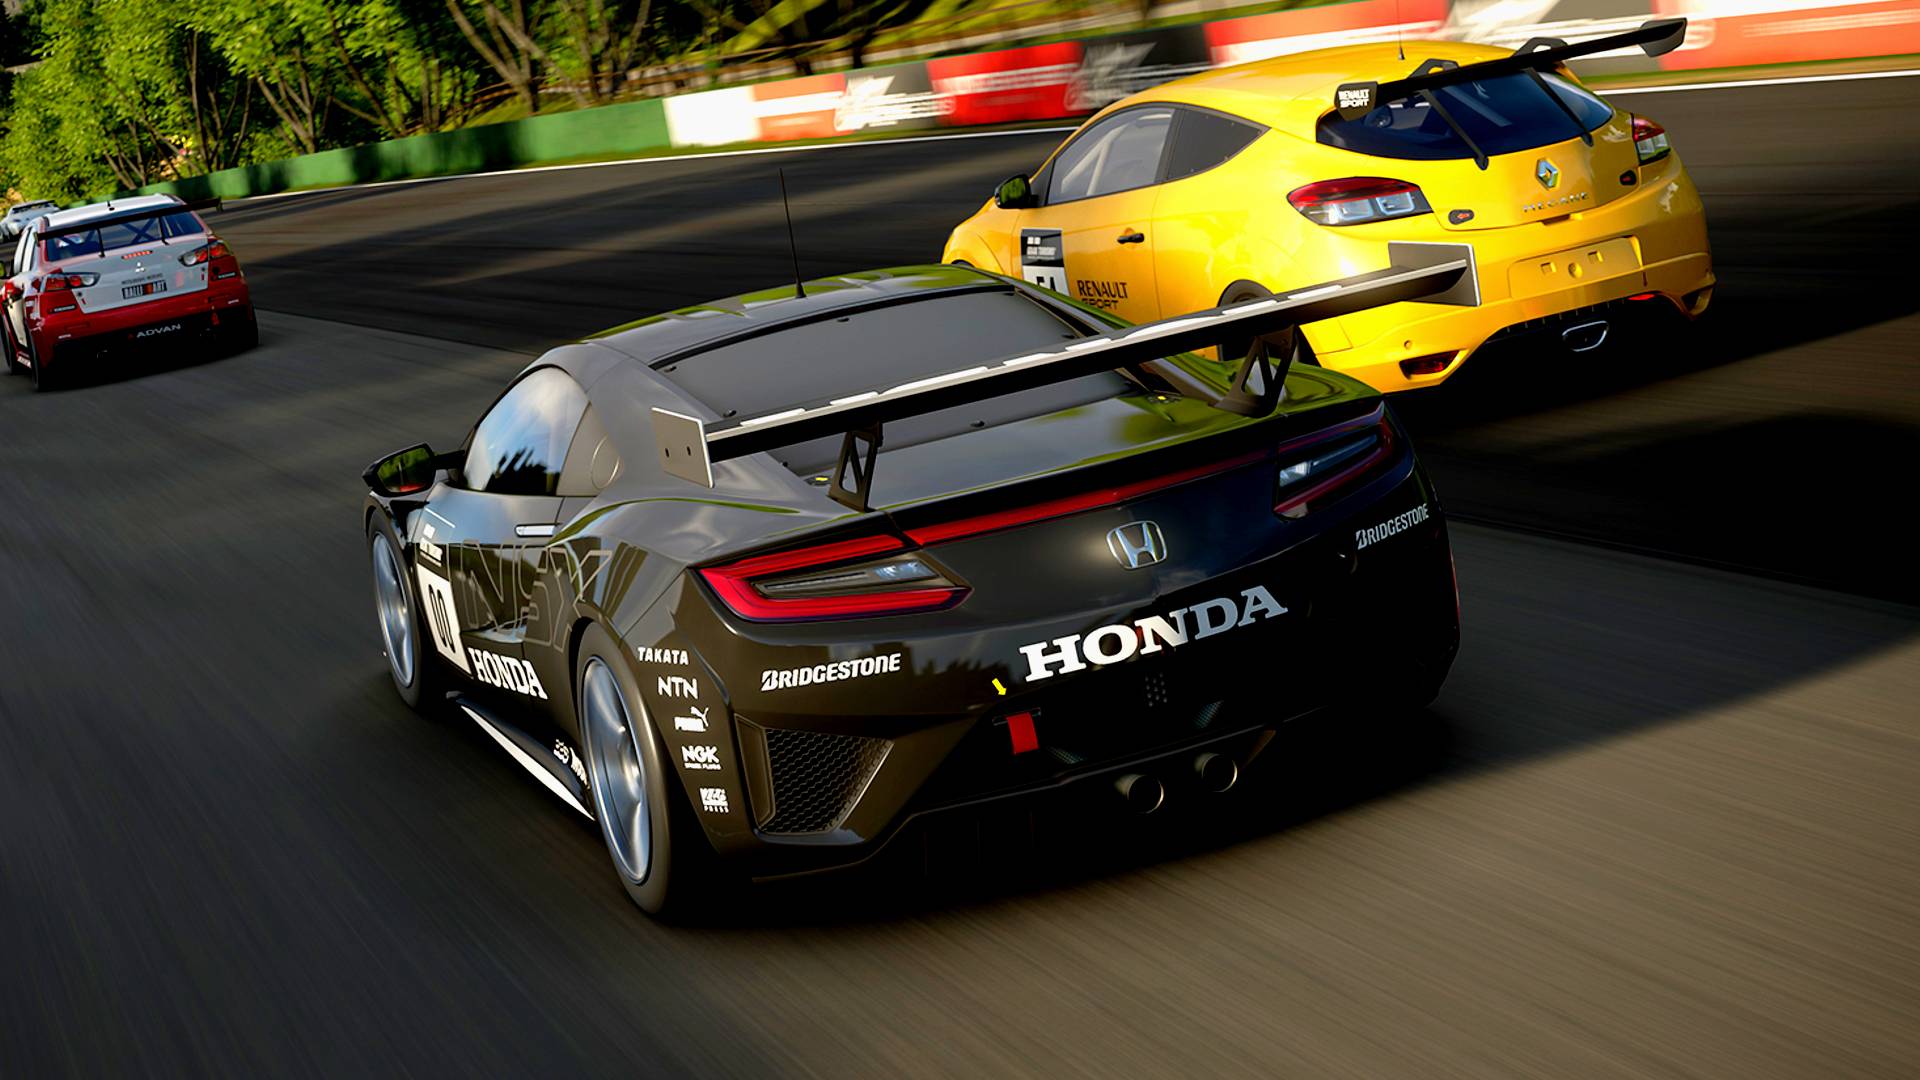 Logisk Retningslinier Clip sommerfugl Gran Turismo 7 car list – all the cars available at launch | The Loadout